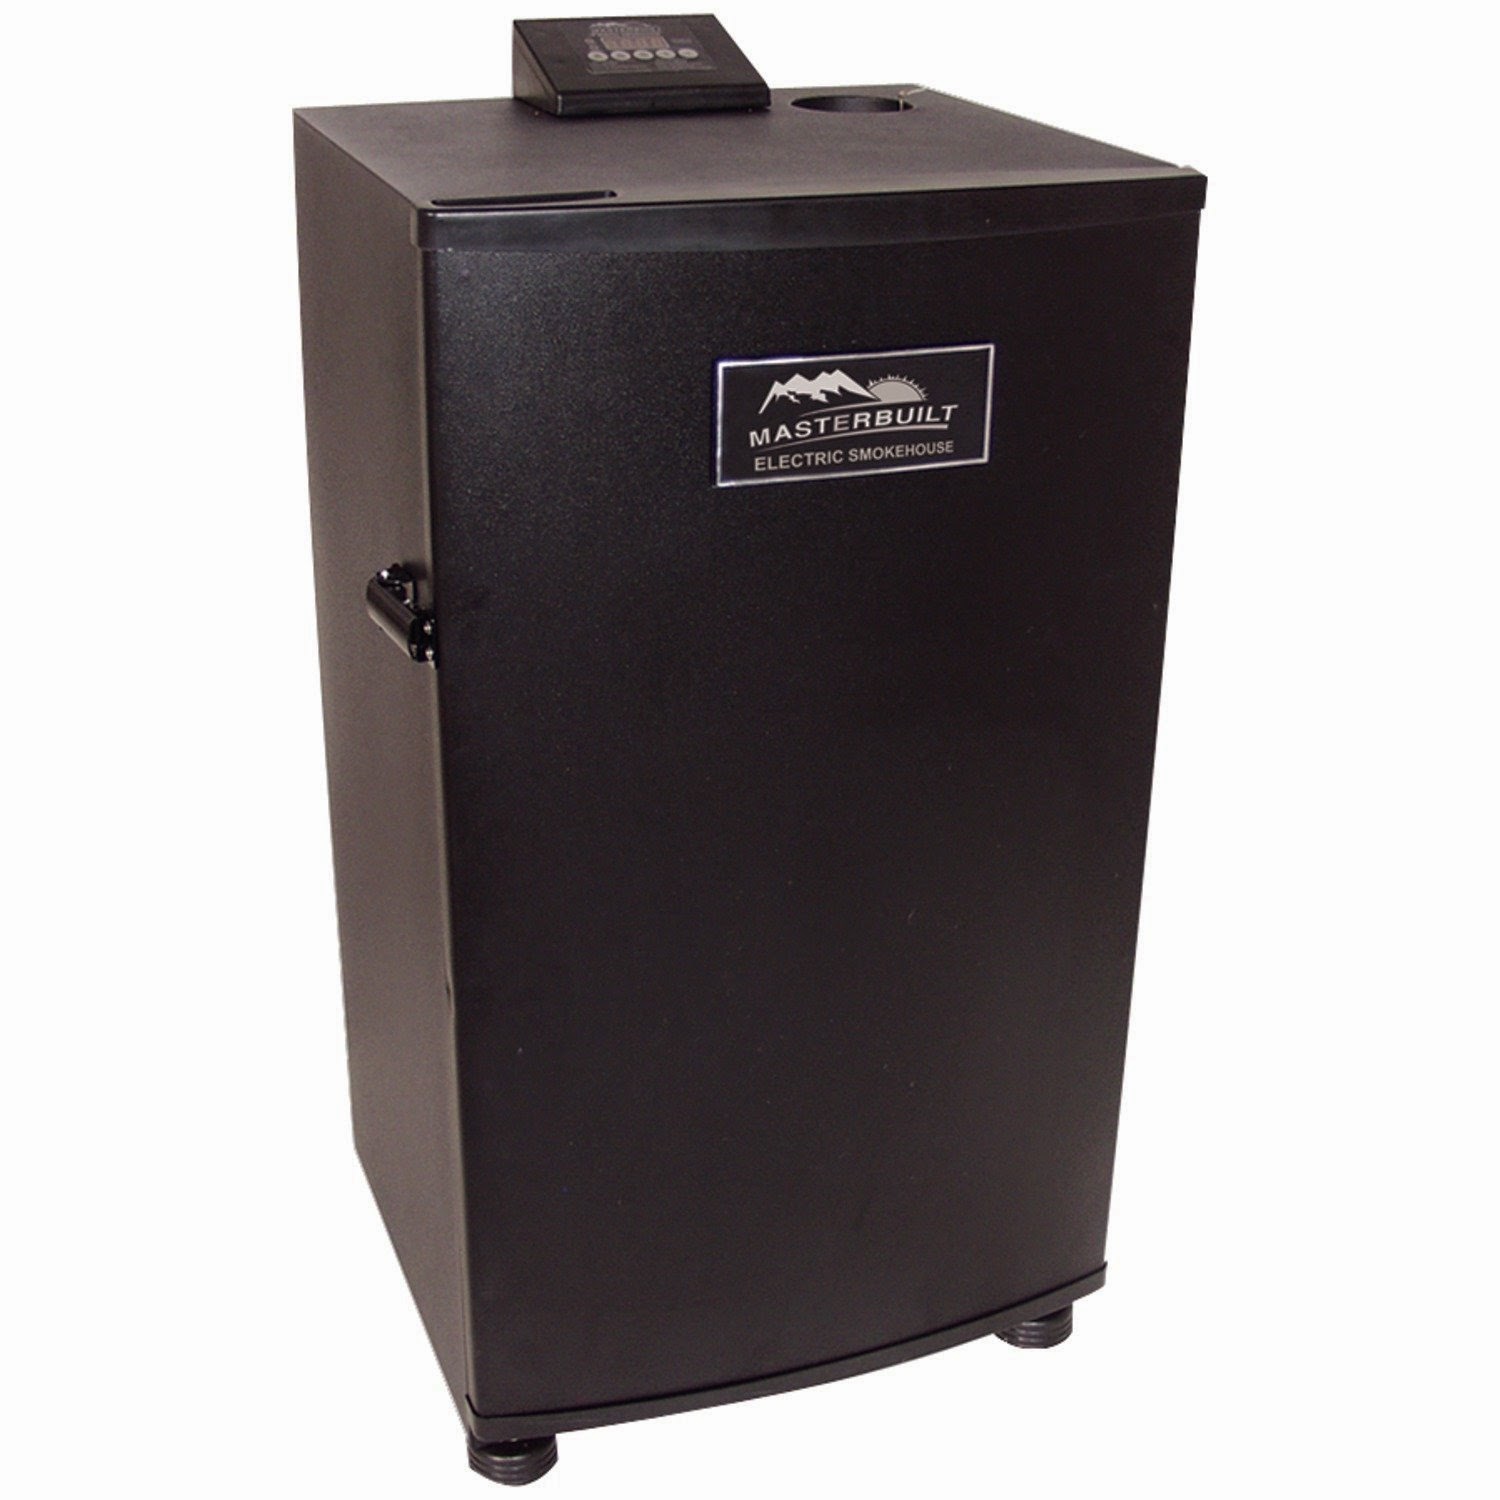 Masterbuilt 20070910 30" electric smoker, review and compare with 20070411 and 20070512